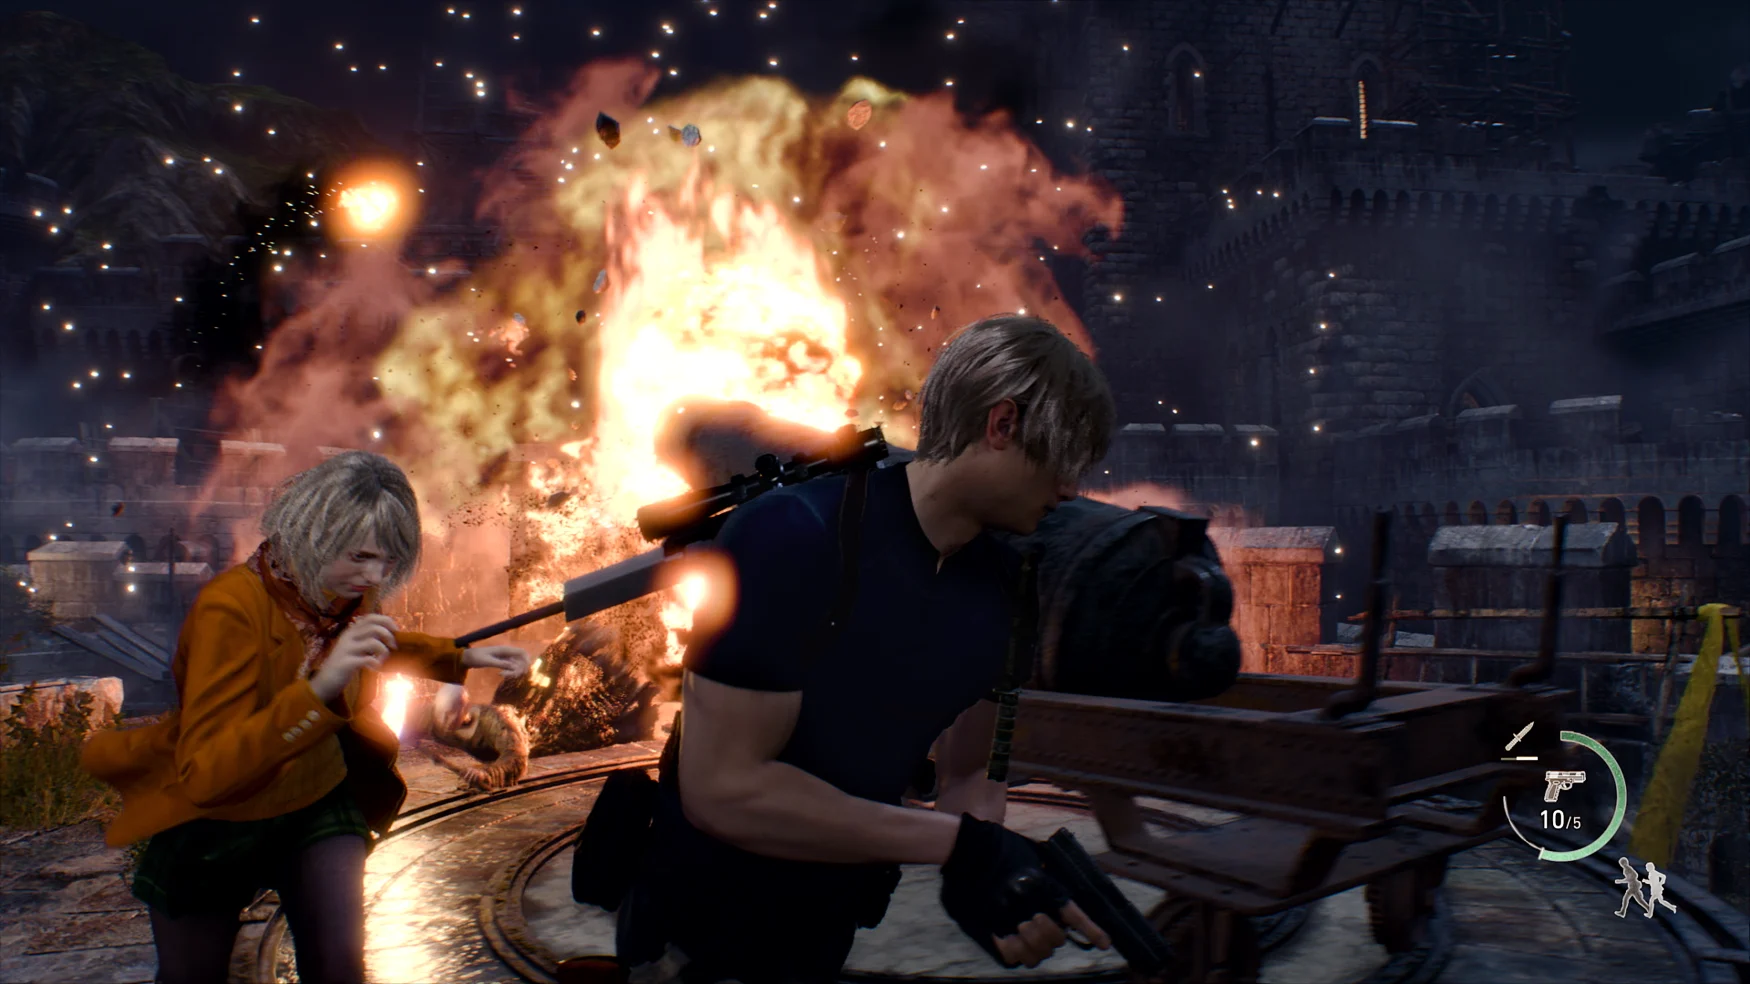 Ashley and Leon flee an explosion on the turret of a castle in Resident Evil 4.